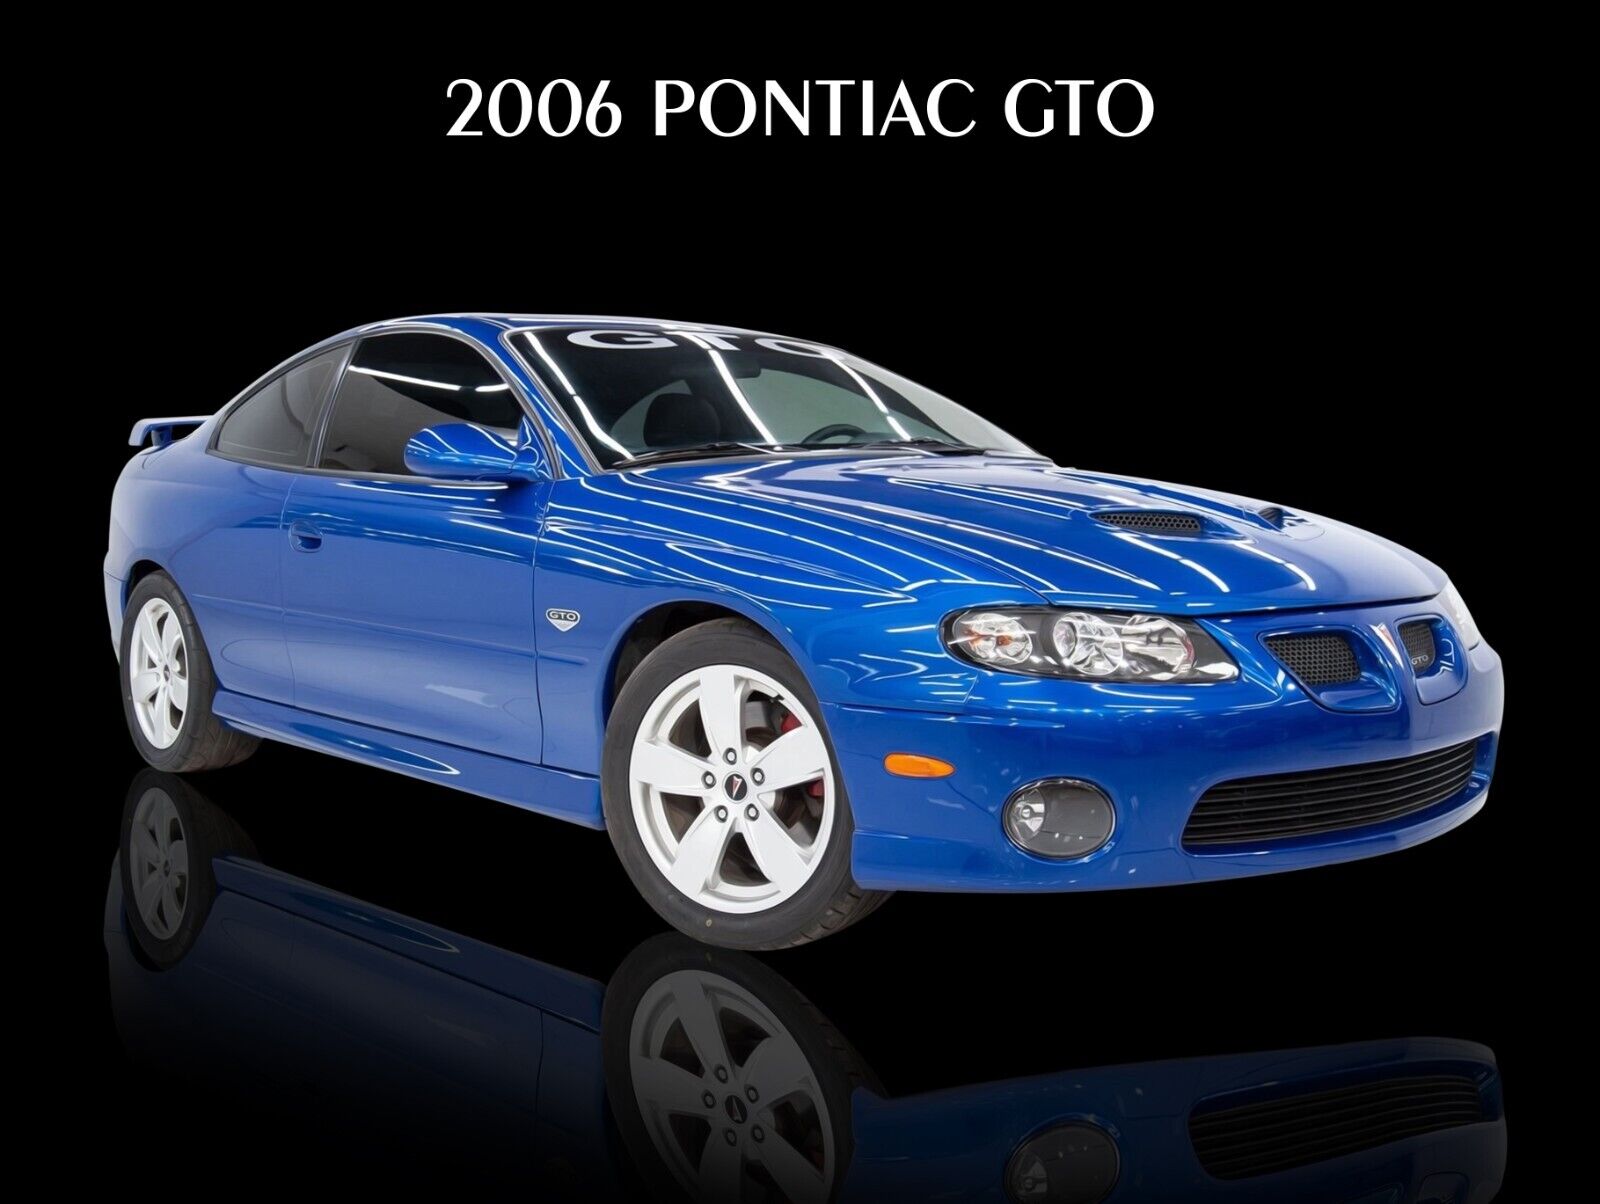 2006 Pontiac GTO NEW METAL SIGN: Mint Condition in Blue